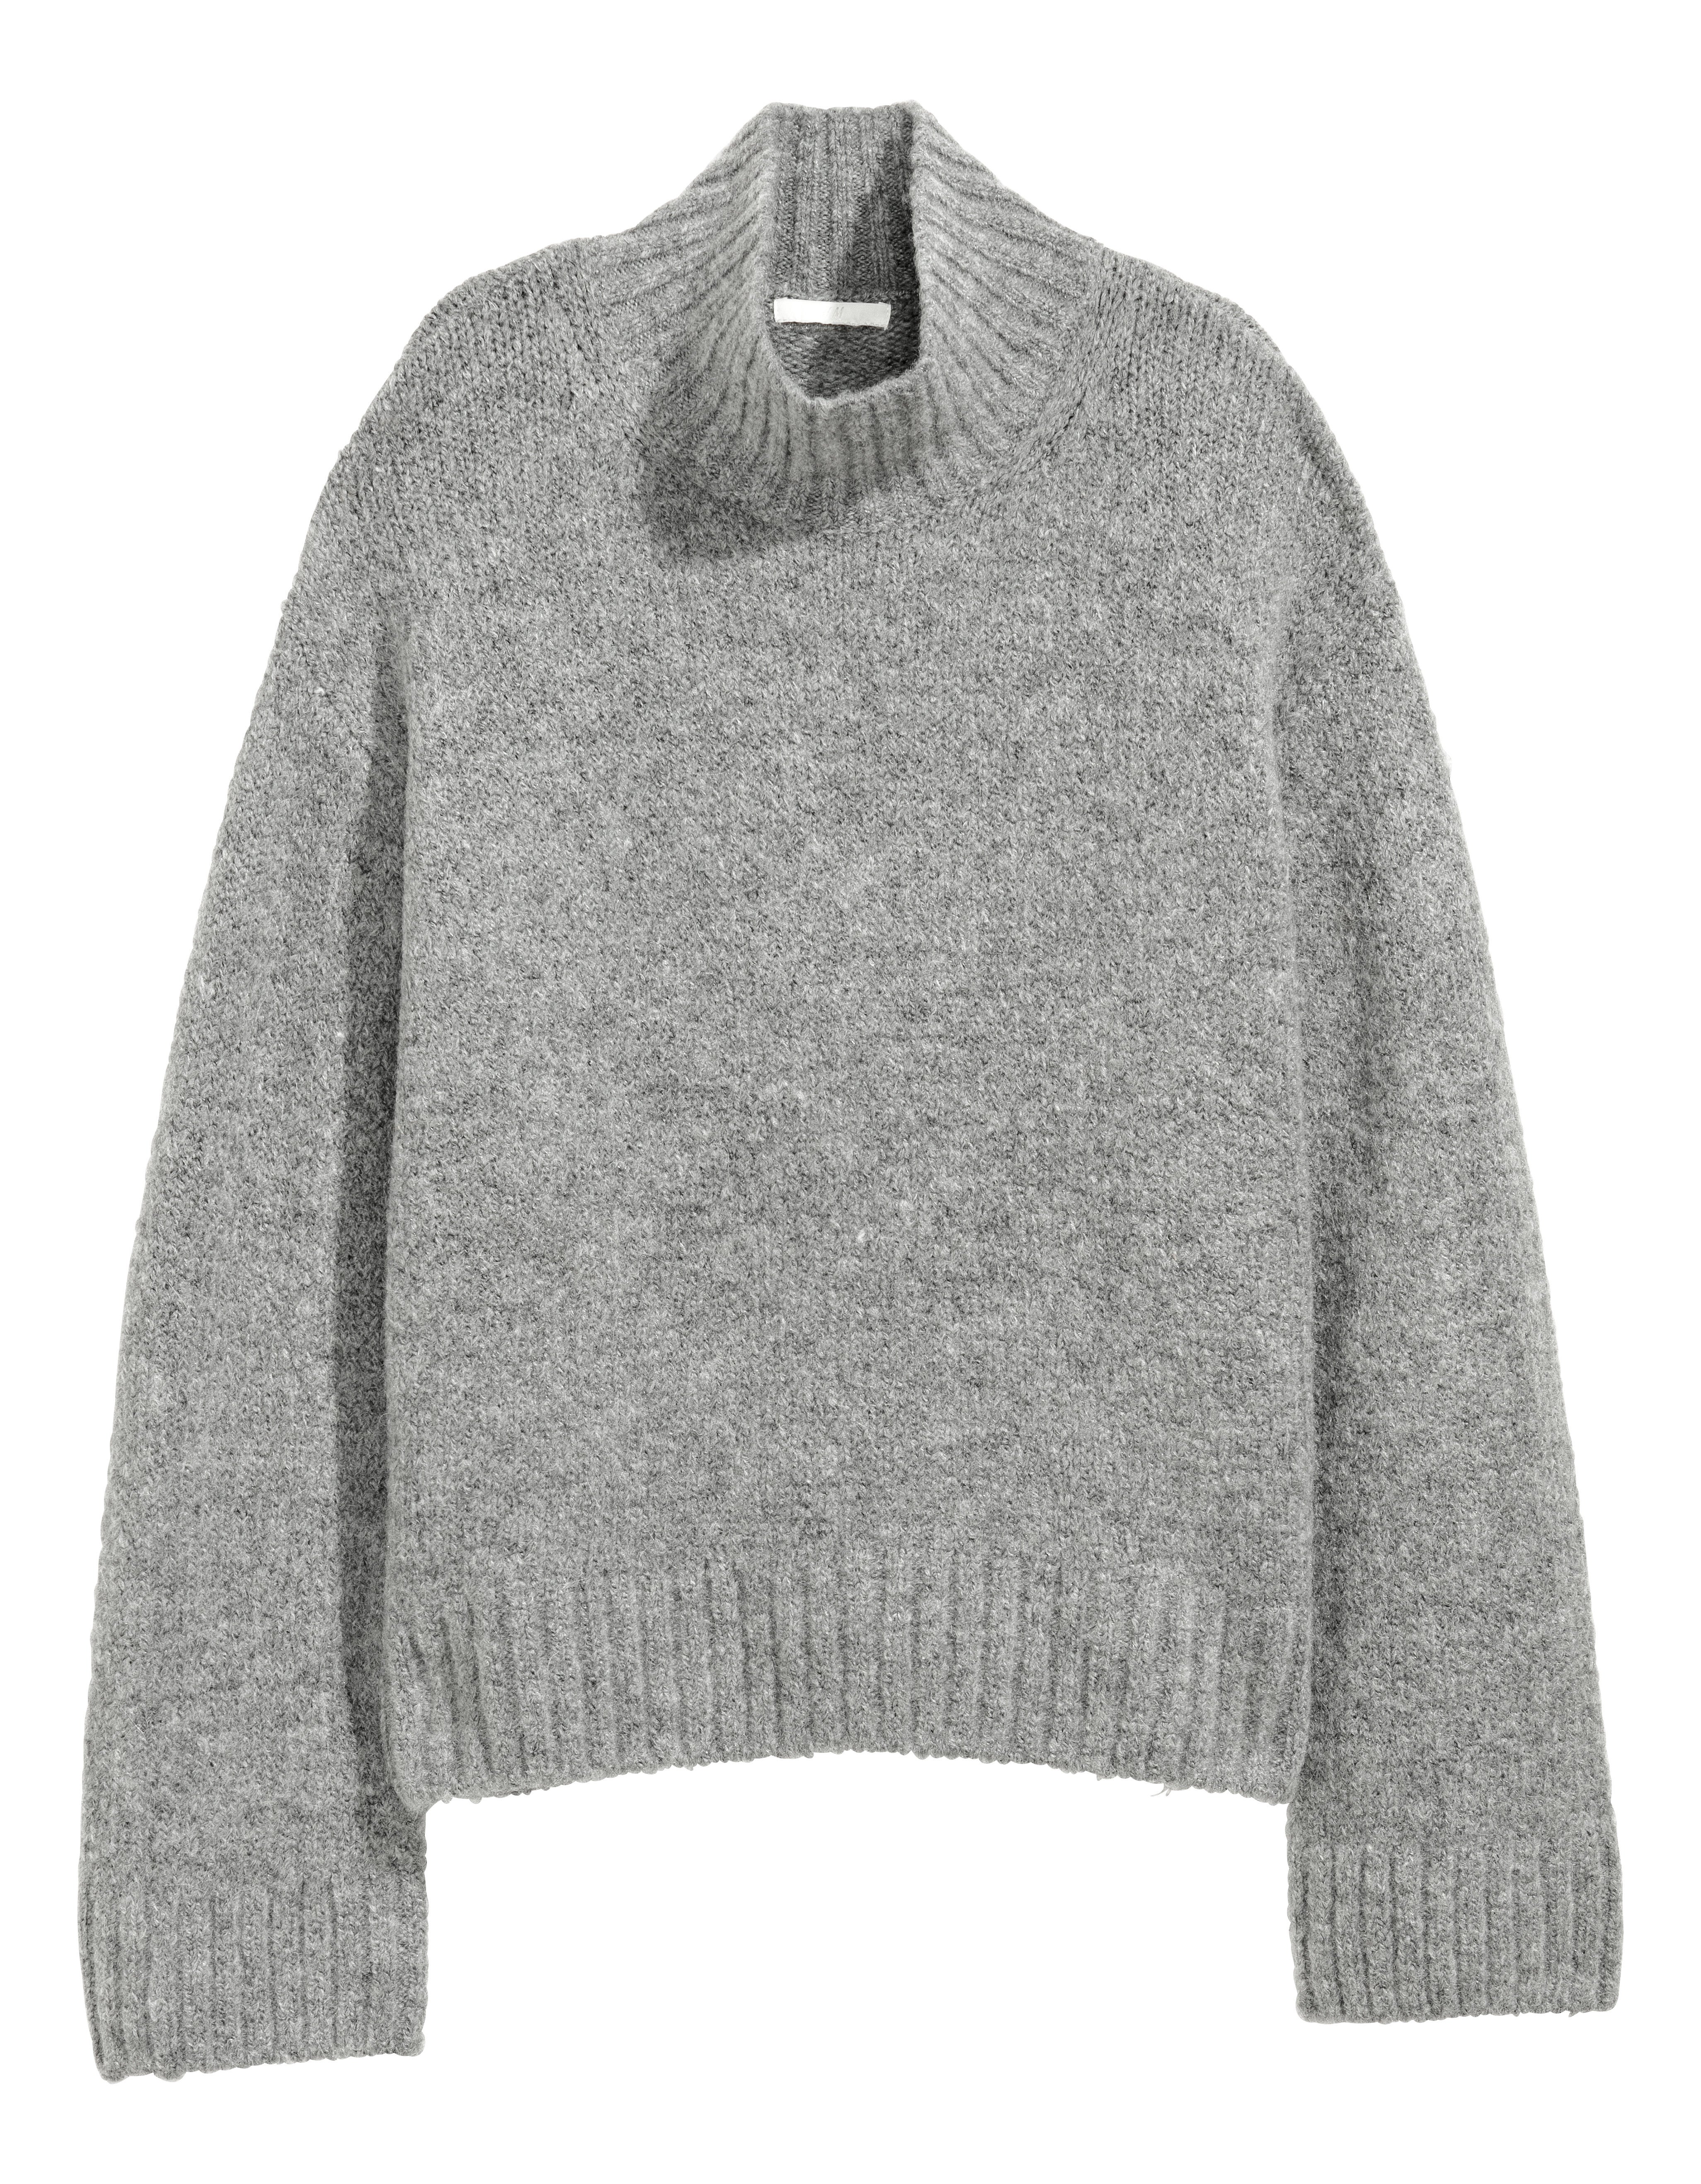 The H&M Black Friday Sale Includes $7 Sweaters, And More Crazy, Good Deals
